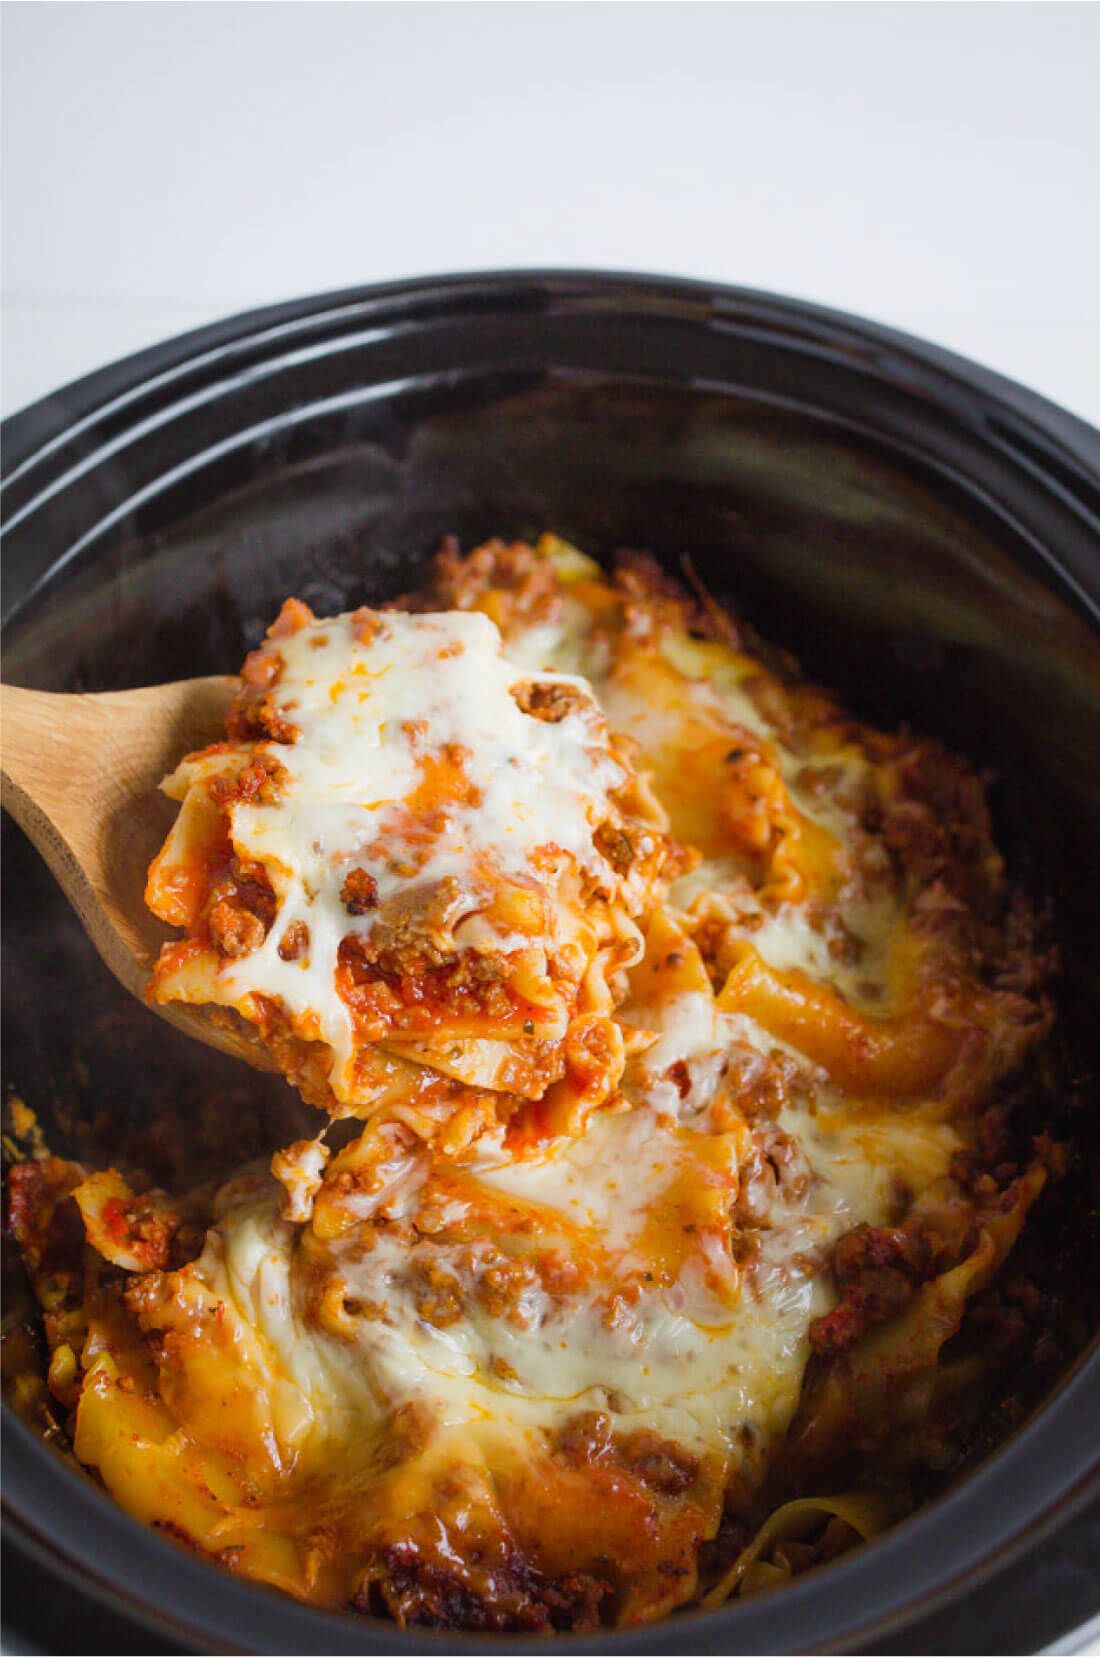 Crockpot Lasagna - a simple way to make an old family favorite.